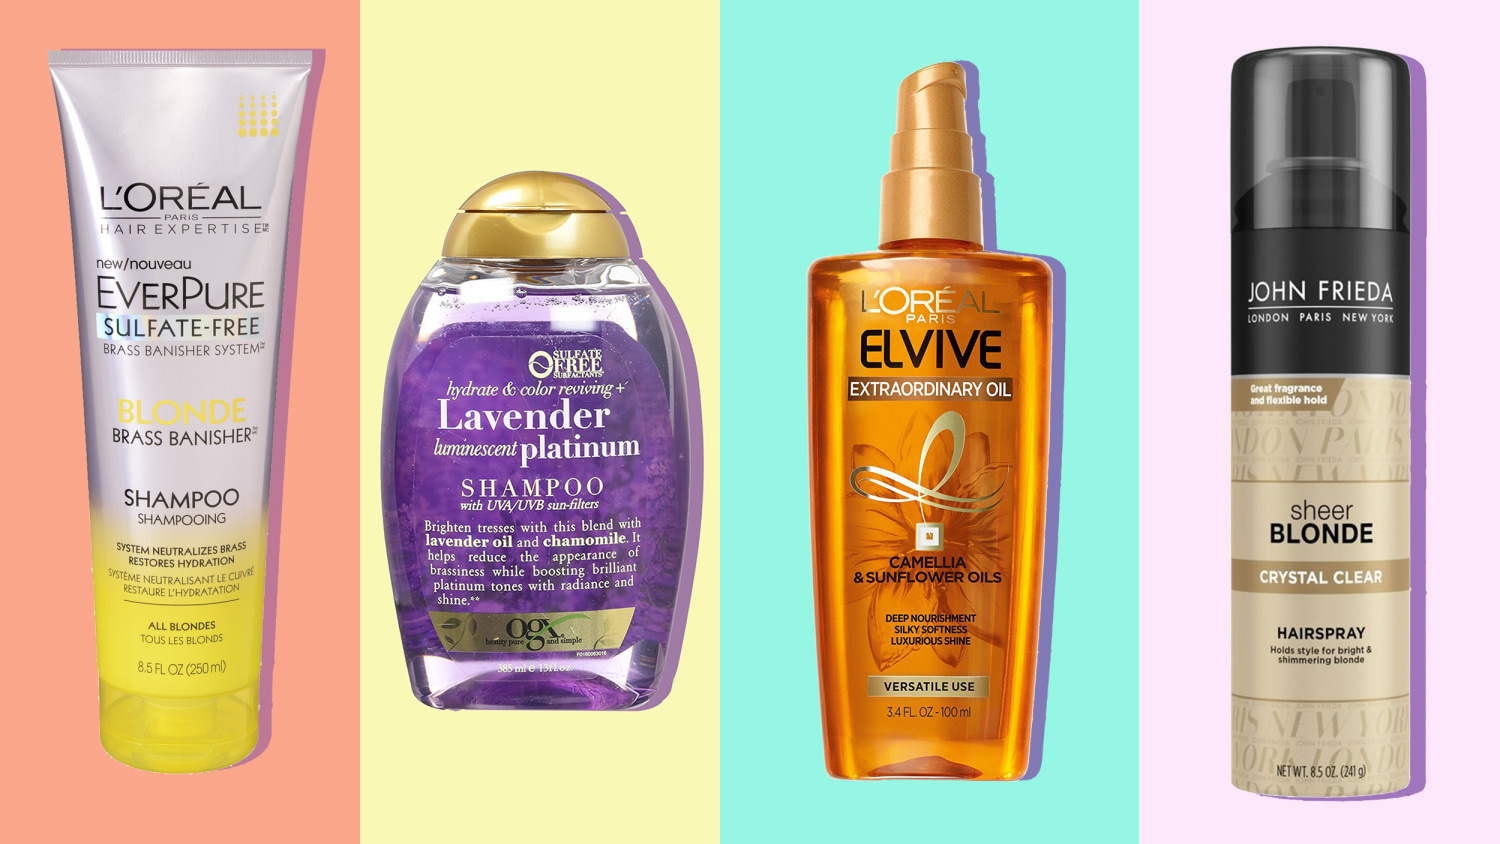 drugstore hair products blondes, blond hair